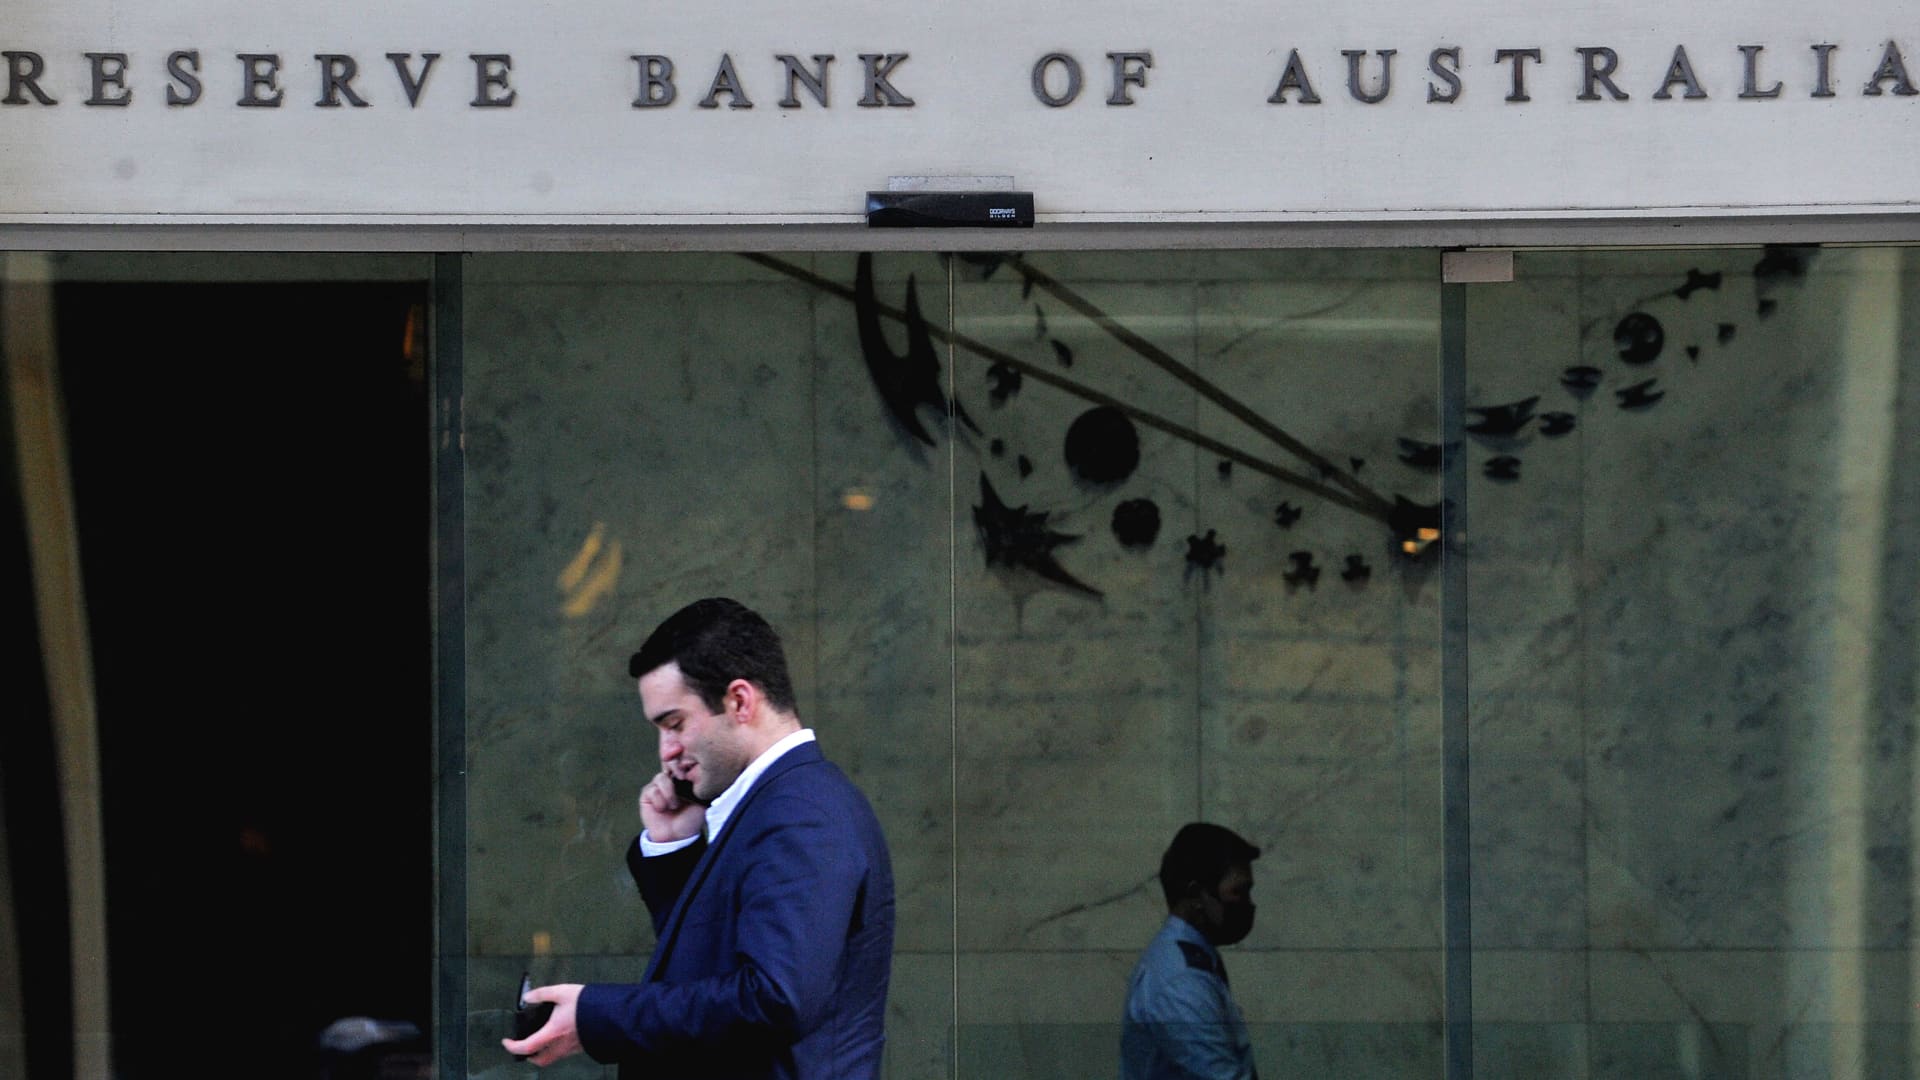 A man walking past the Reserve Bank of Australia in the central business district of Sydney on June 7, 2022.